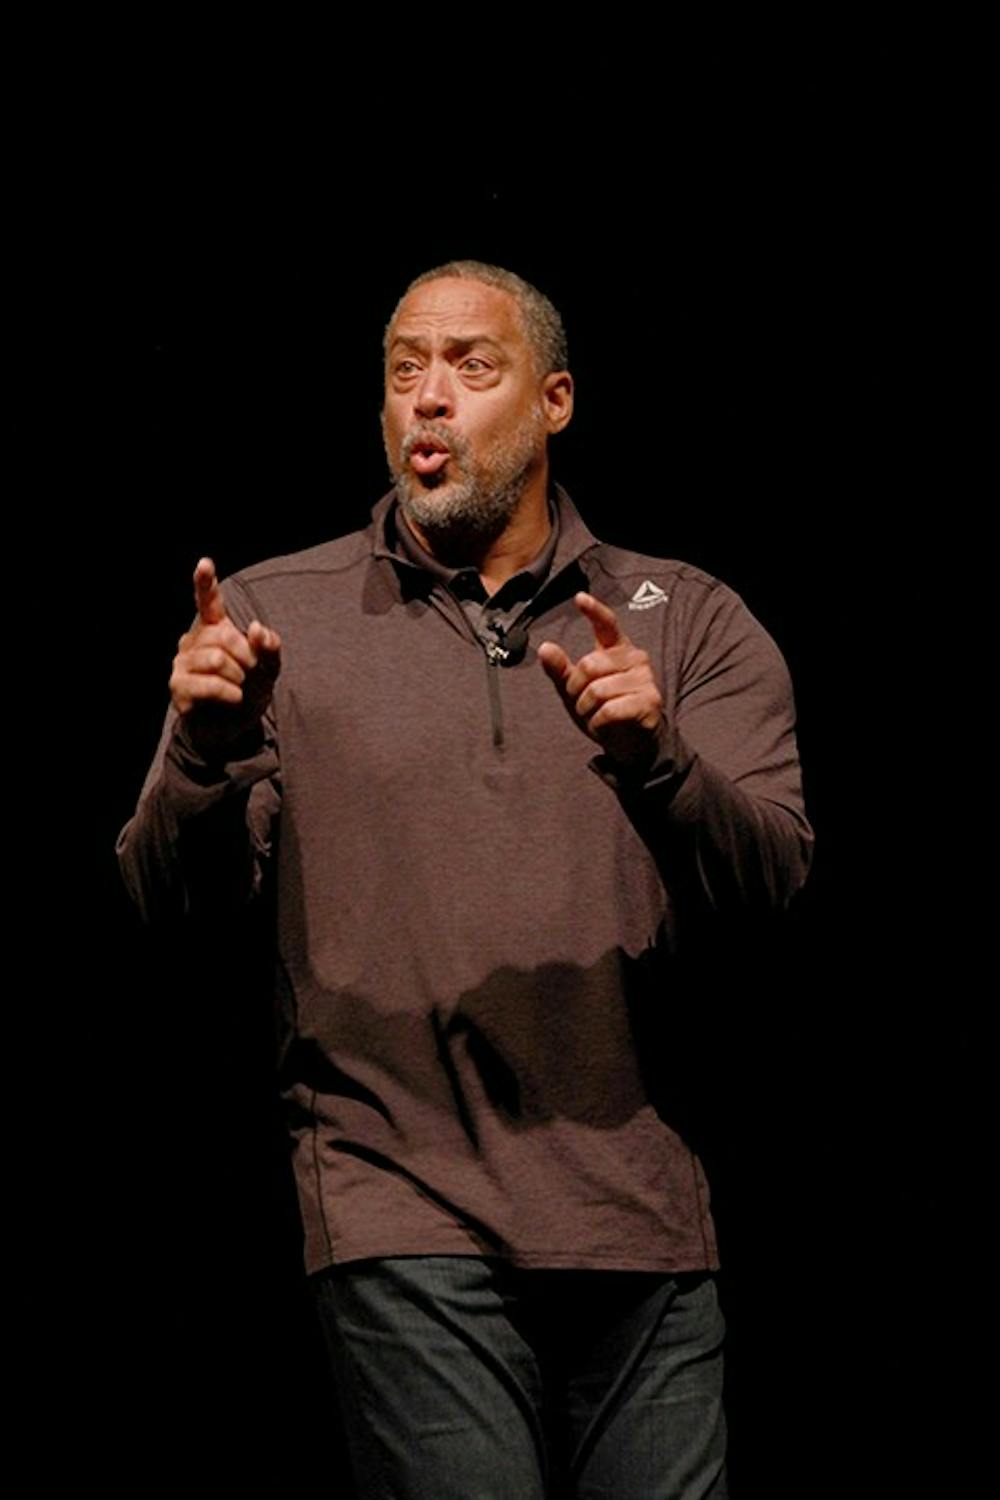 Former NFL player offers insight, advice on sexual violence, male privilege